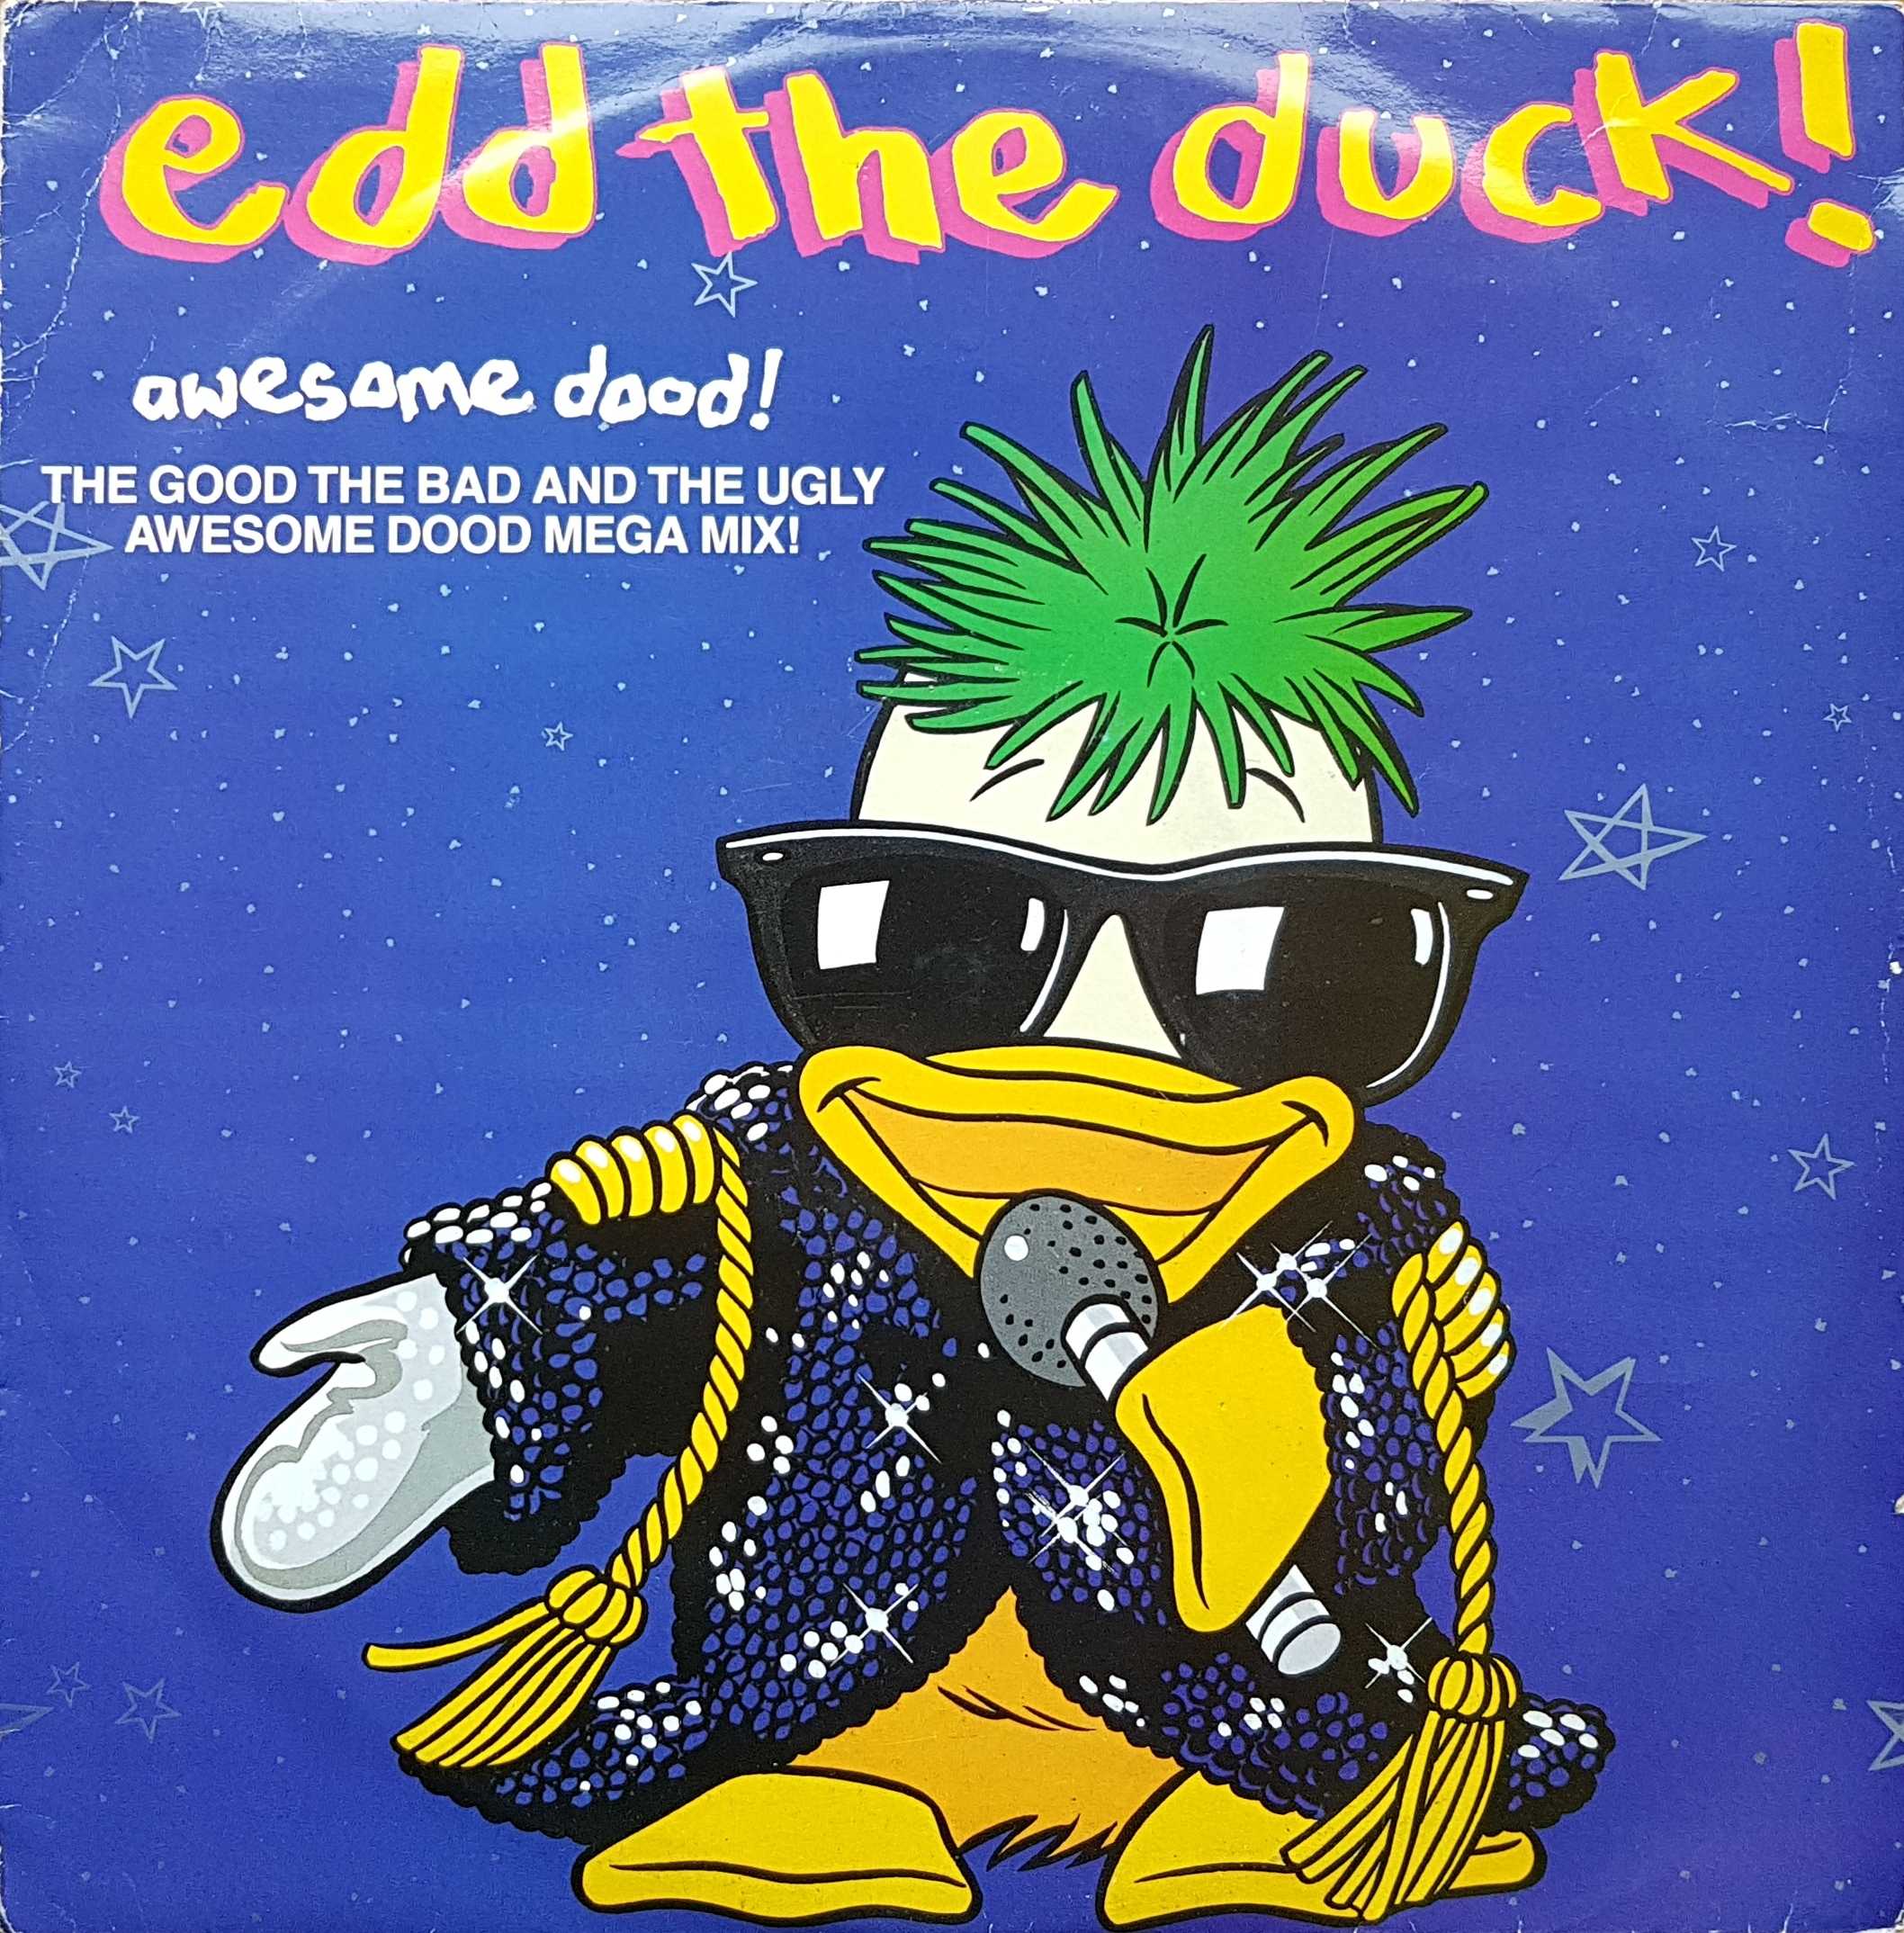 Picture of 12 RSL 001 Awesome dood ! by artist Hamilton (Edd the duck) from the BBC 12inches - Records and Tapes library